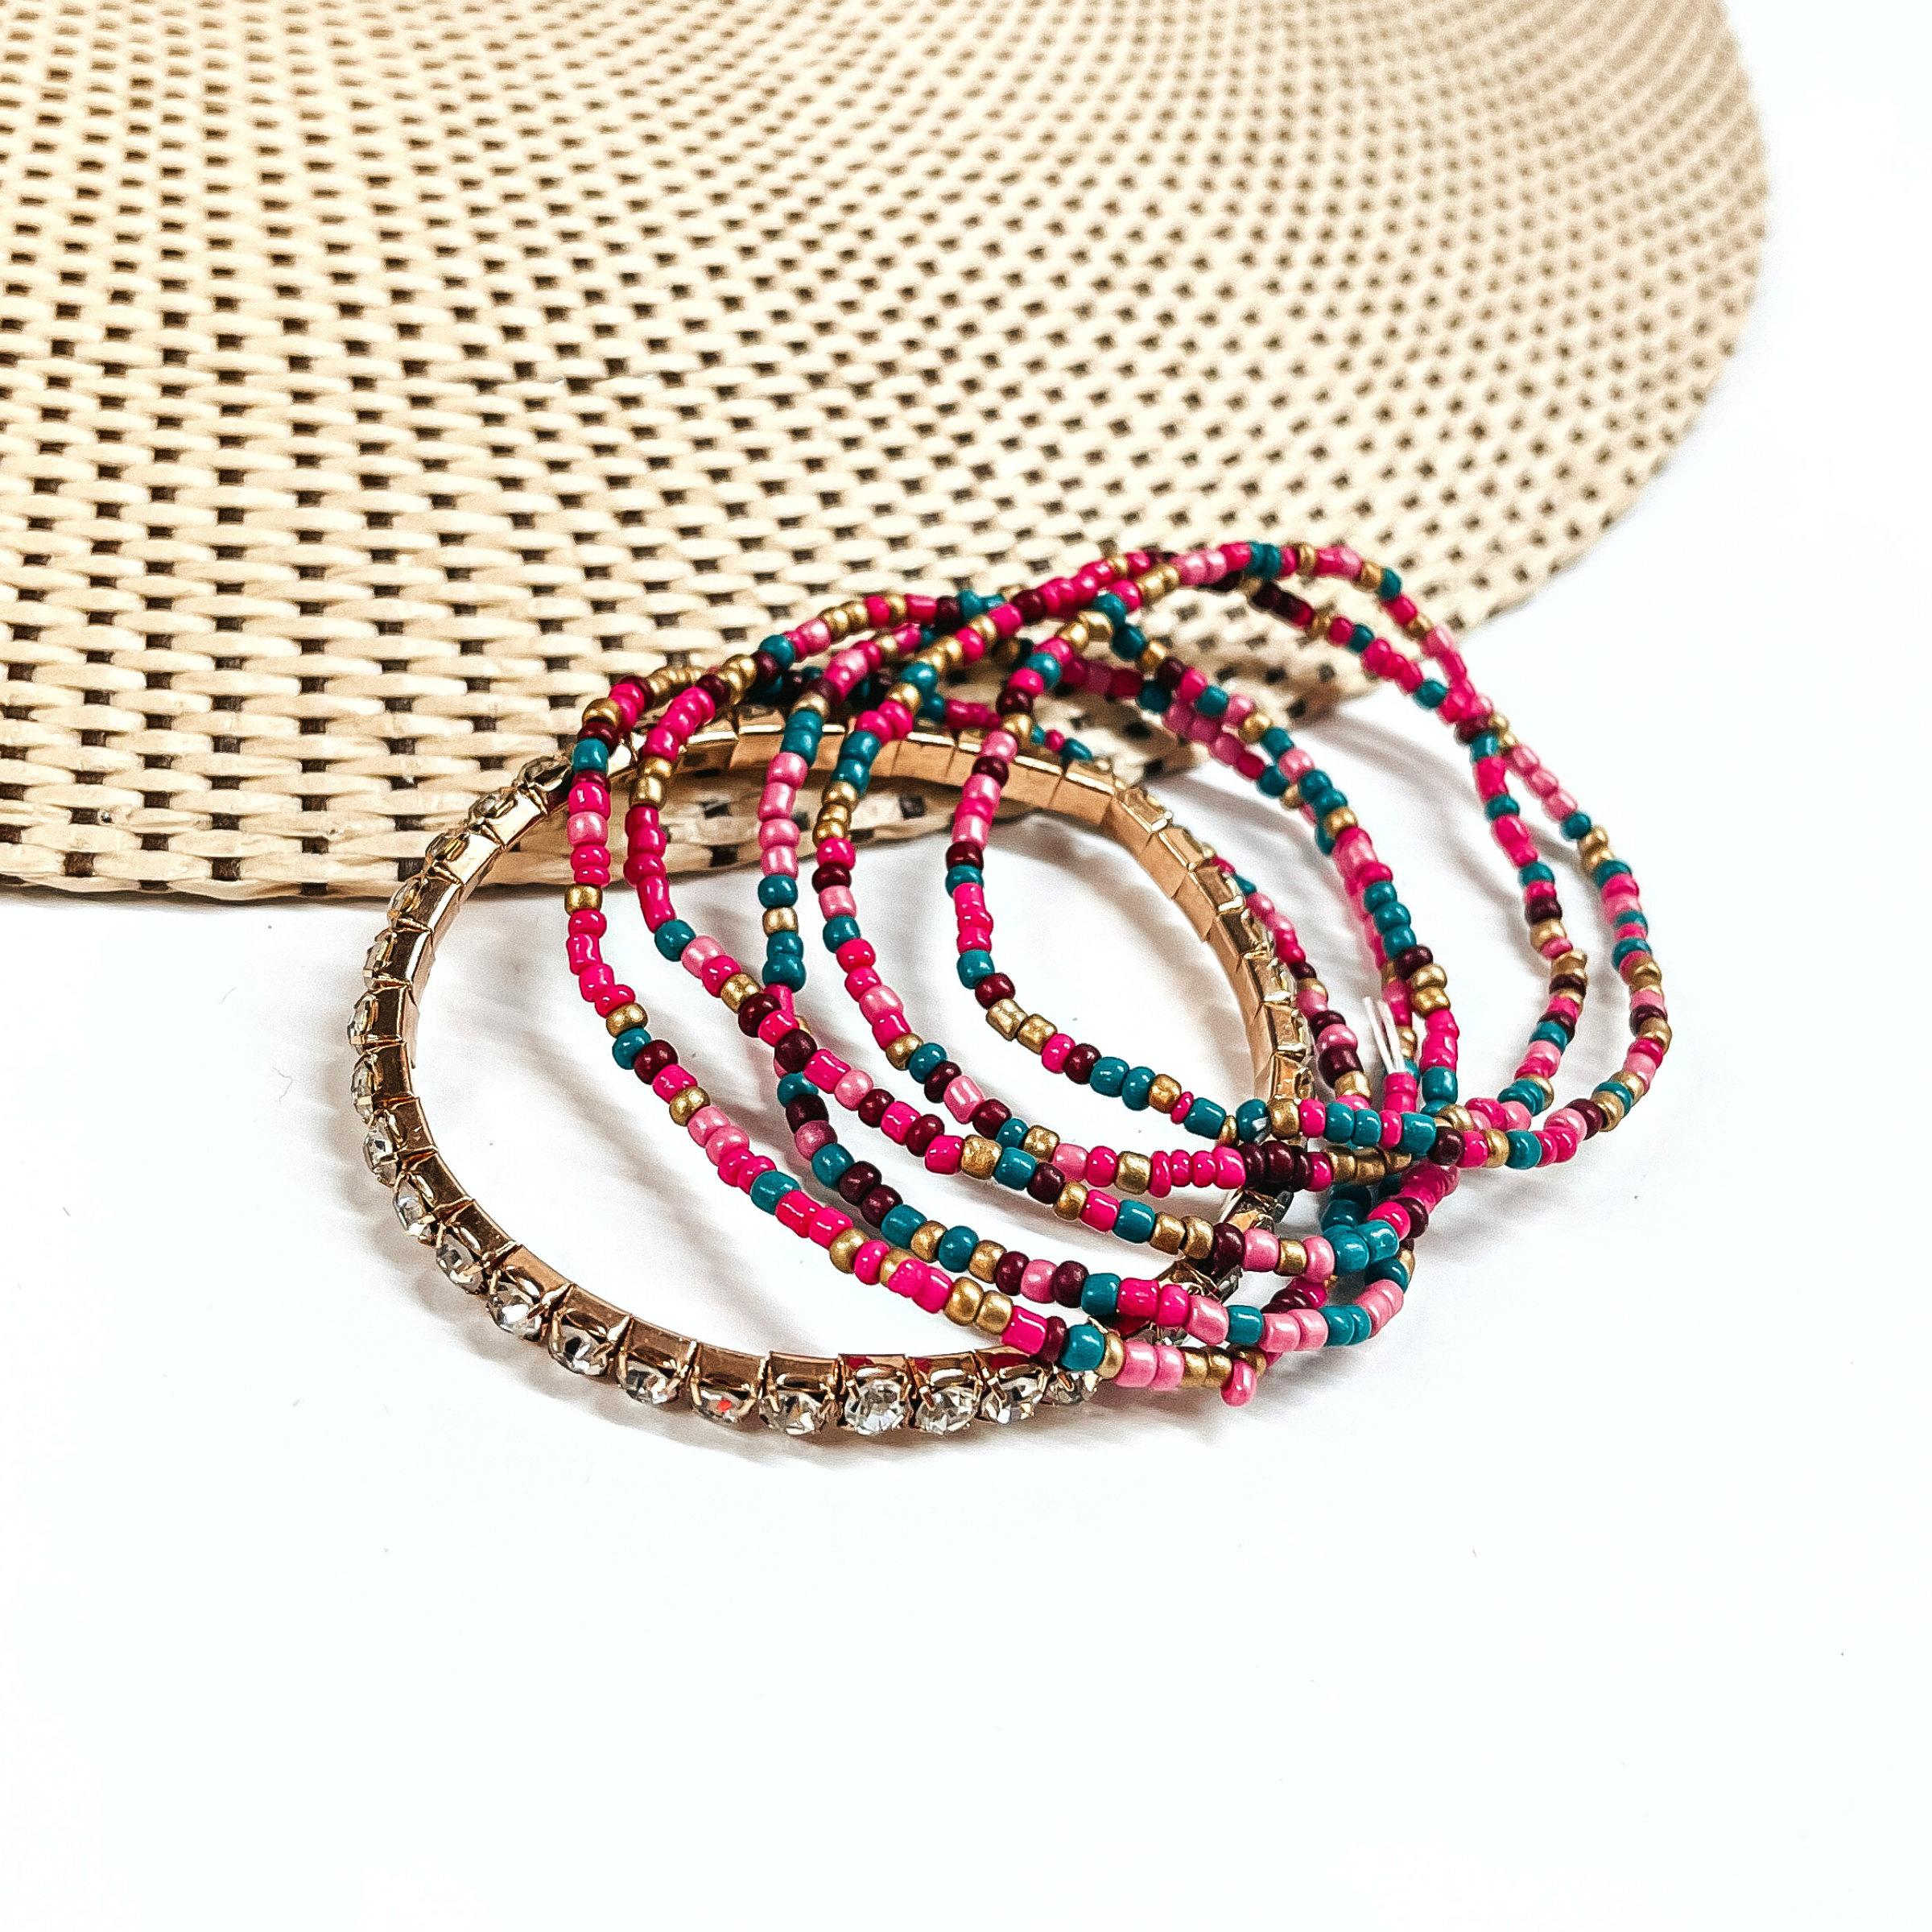 This is a set of six bracelets in a teal/pink mix  There are five seedbeaded bracelets in teal, dar purple, gold, and pink.  There is a one clear rhinestone bracelet in a gold setting.  These bracelets are laying partly on a straw hat and a white background.